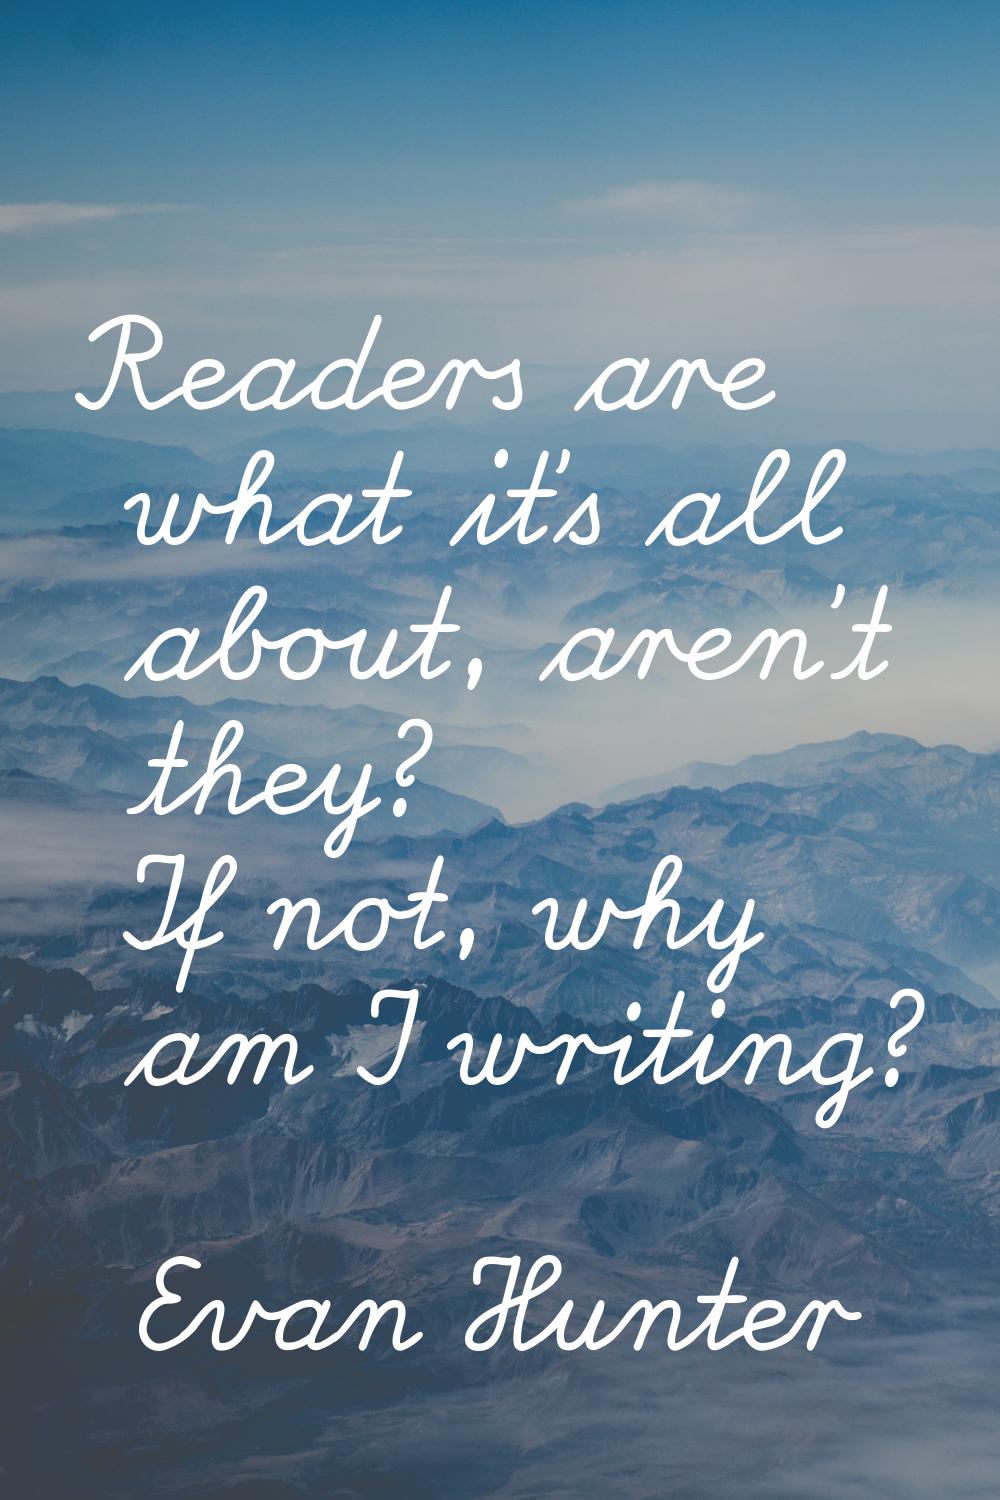 Readers are what it's all about, aren't they? If not, why am I writing?